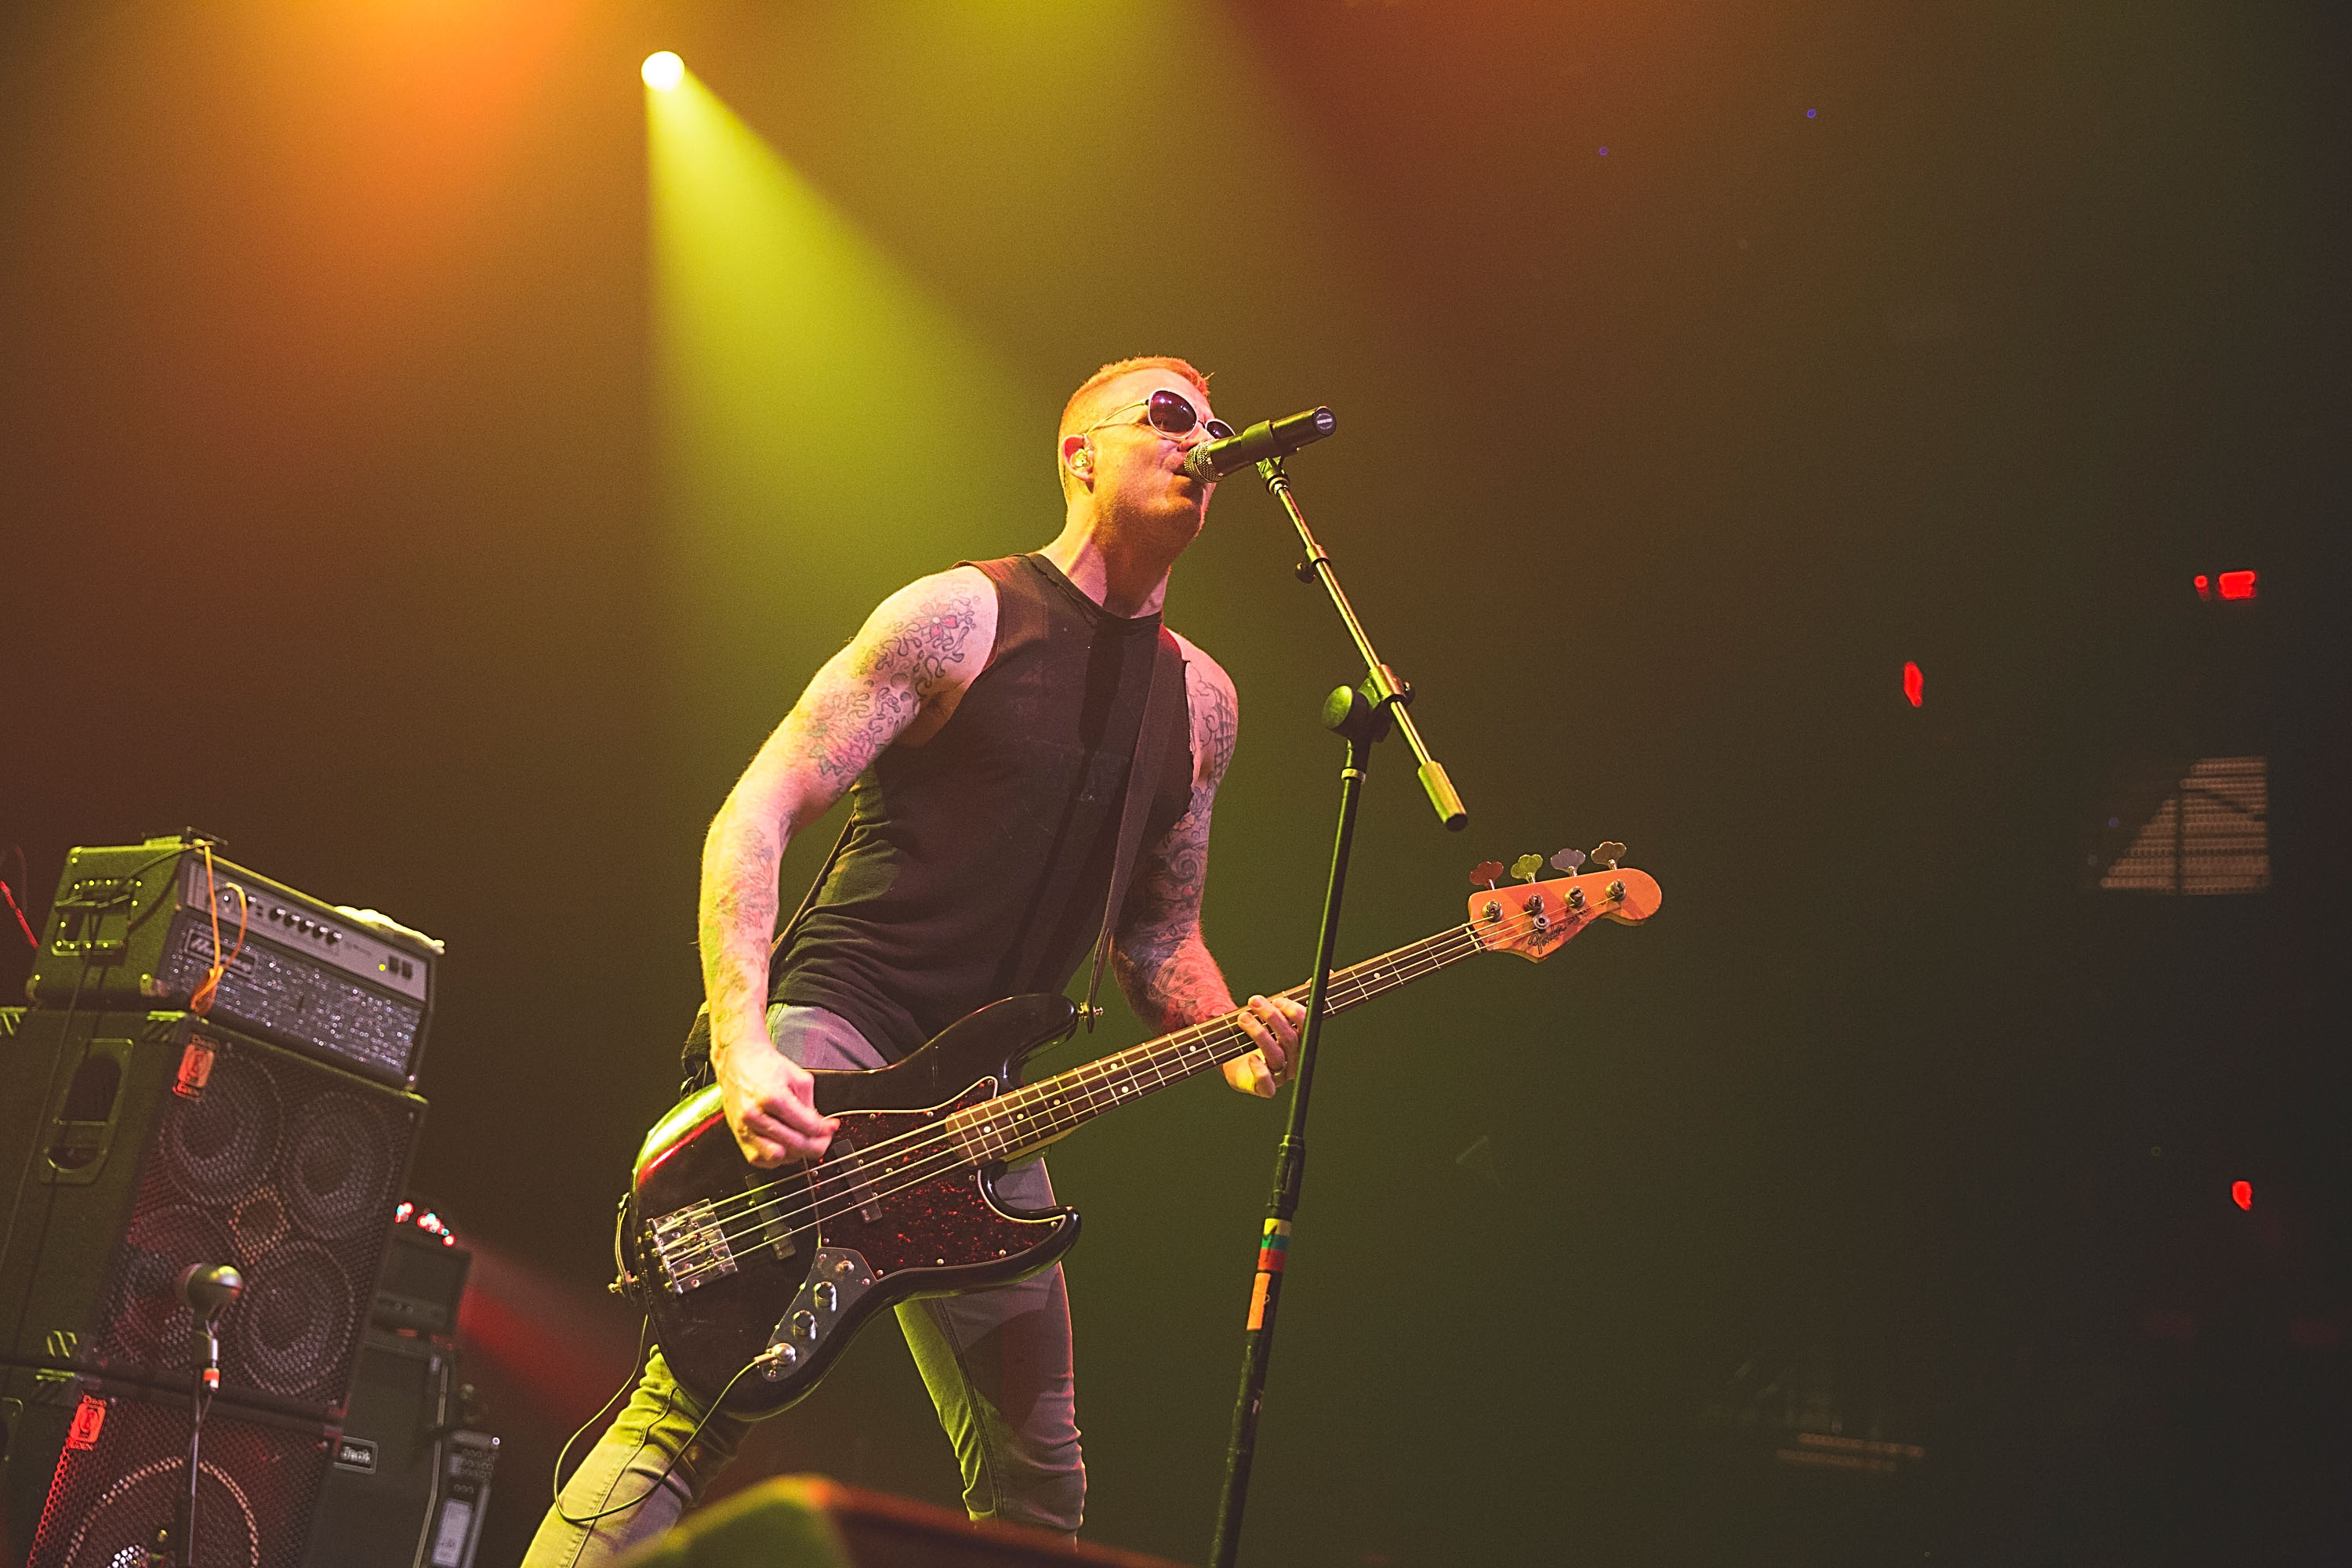 Eve 6 band, Frontman's outspokenness, Rock music debut, Fortune magazine, 3000x2000 HD Desktop